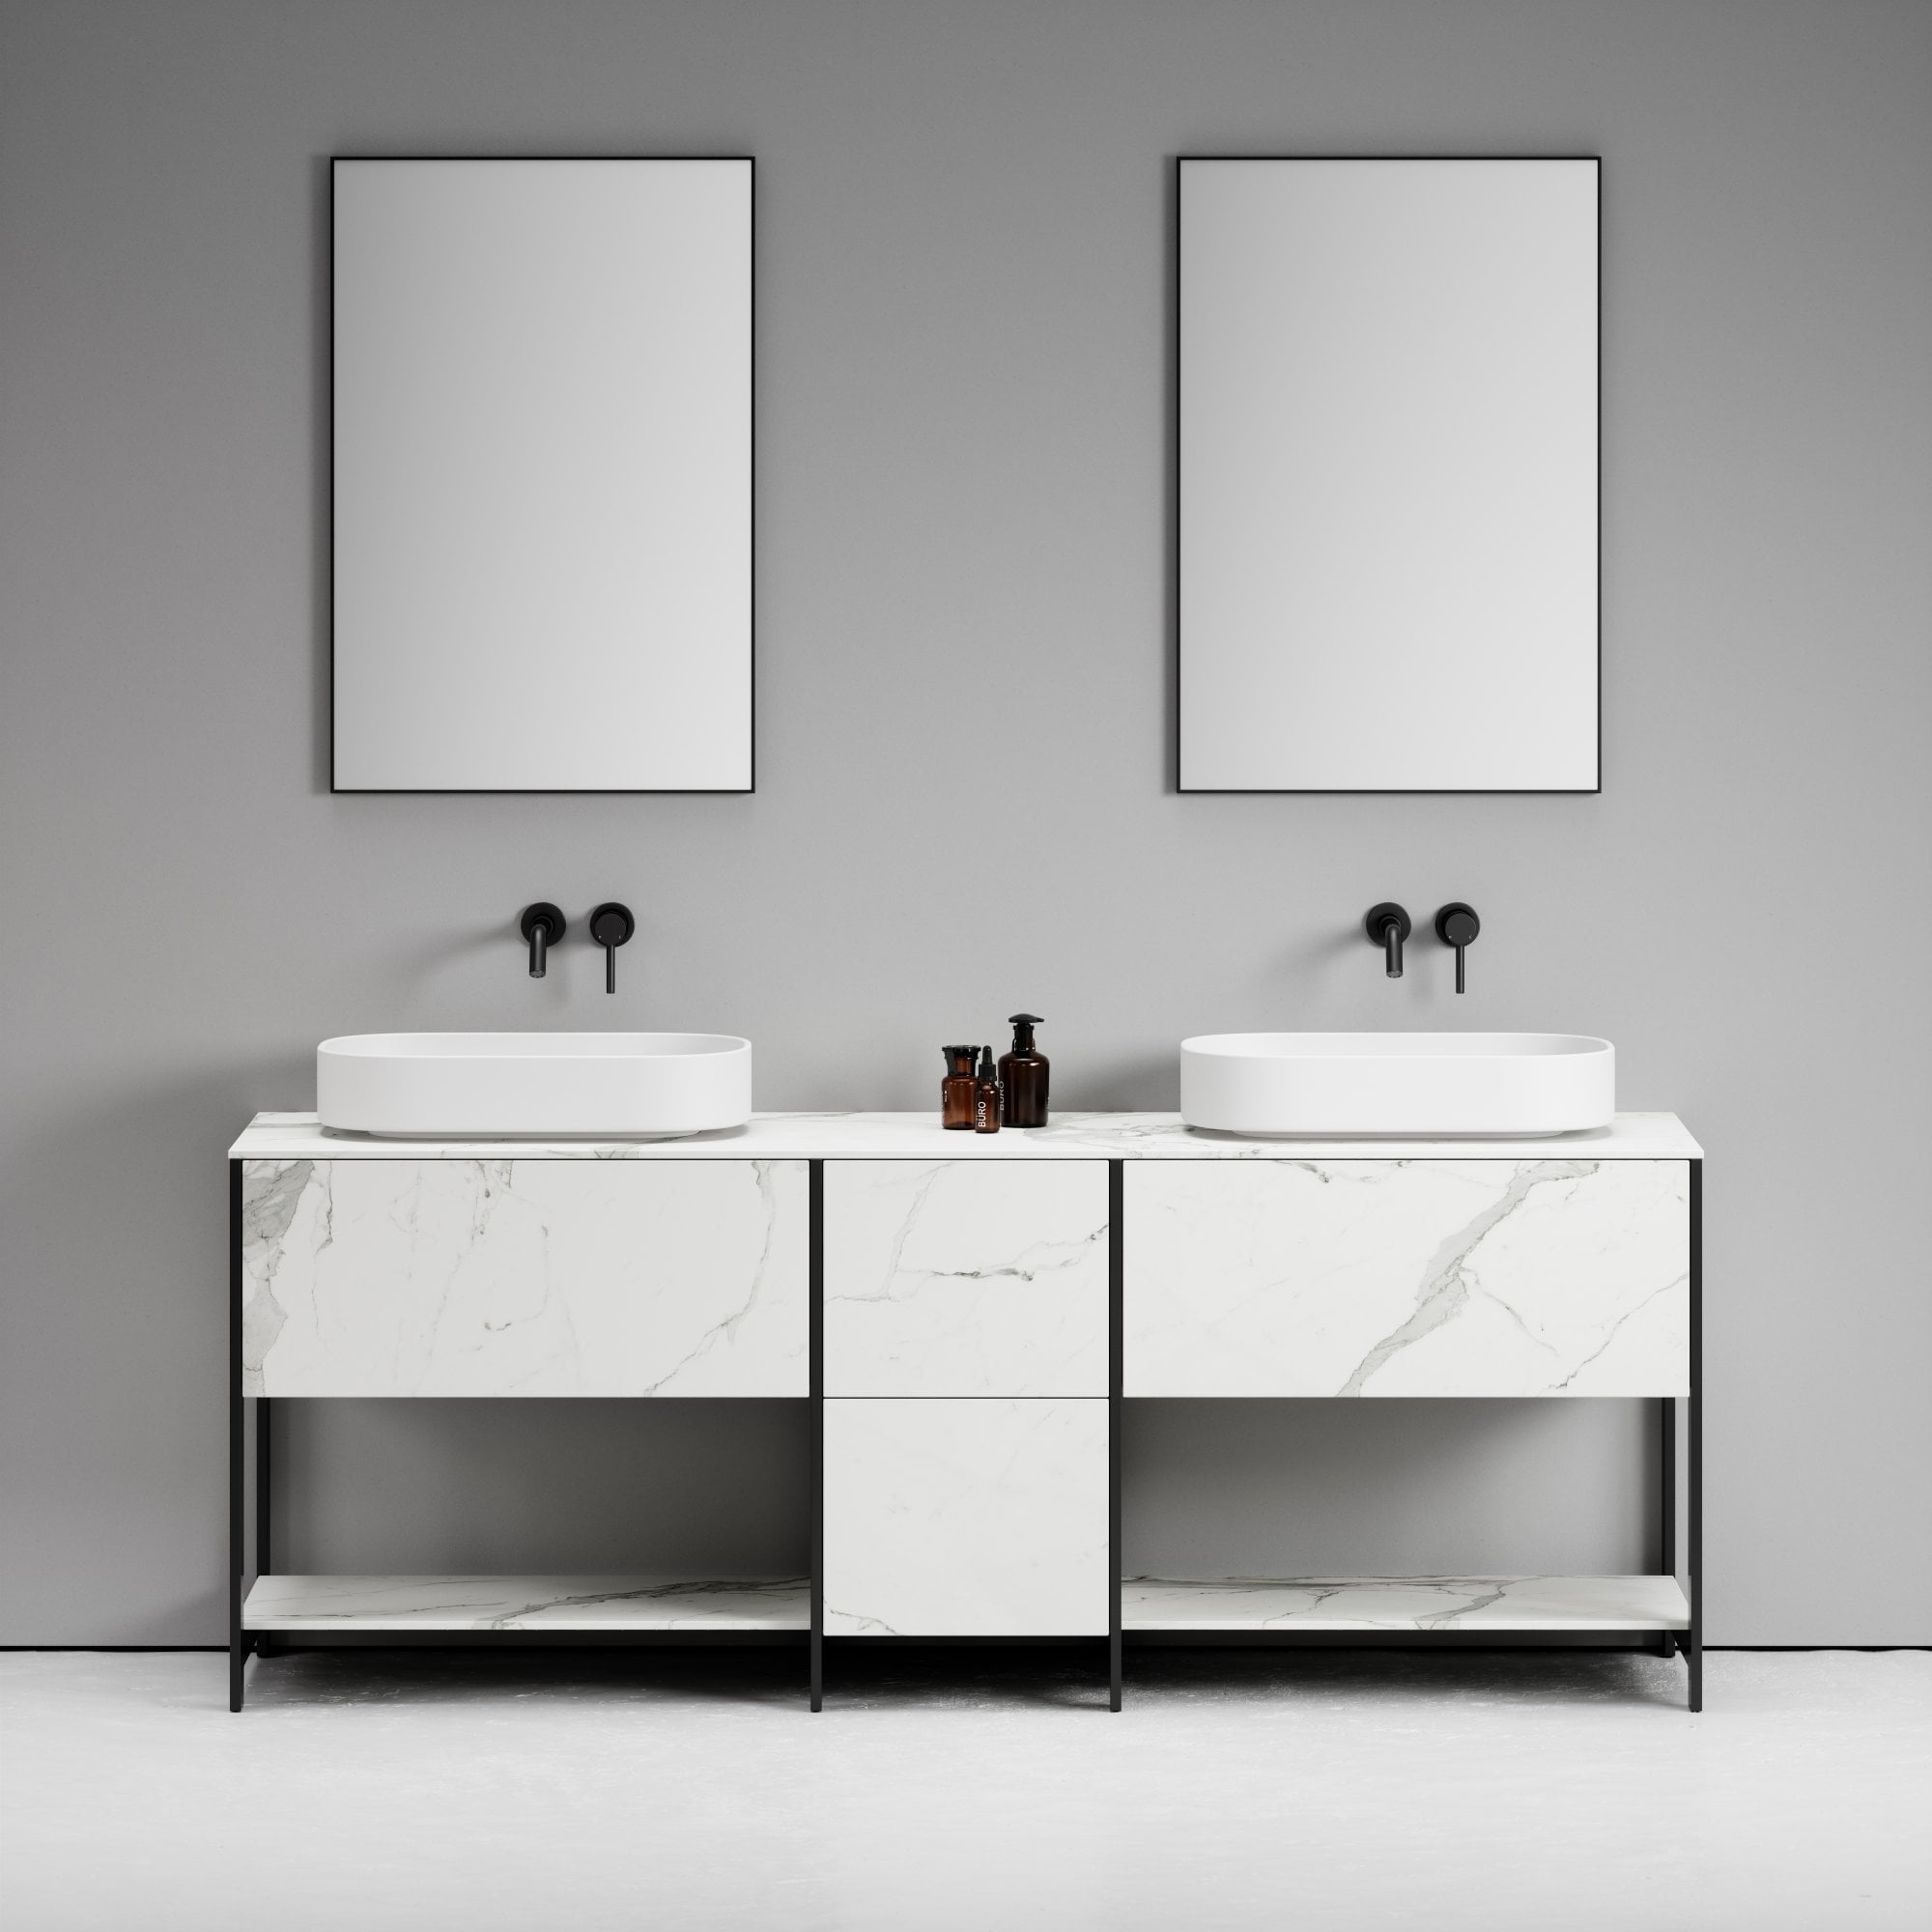 About the Various Types of Basin Vanity Currently Available